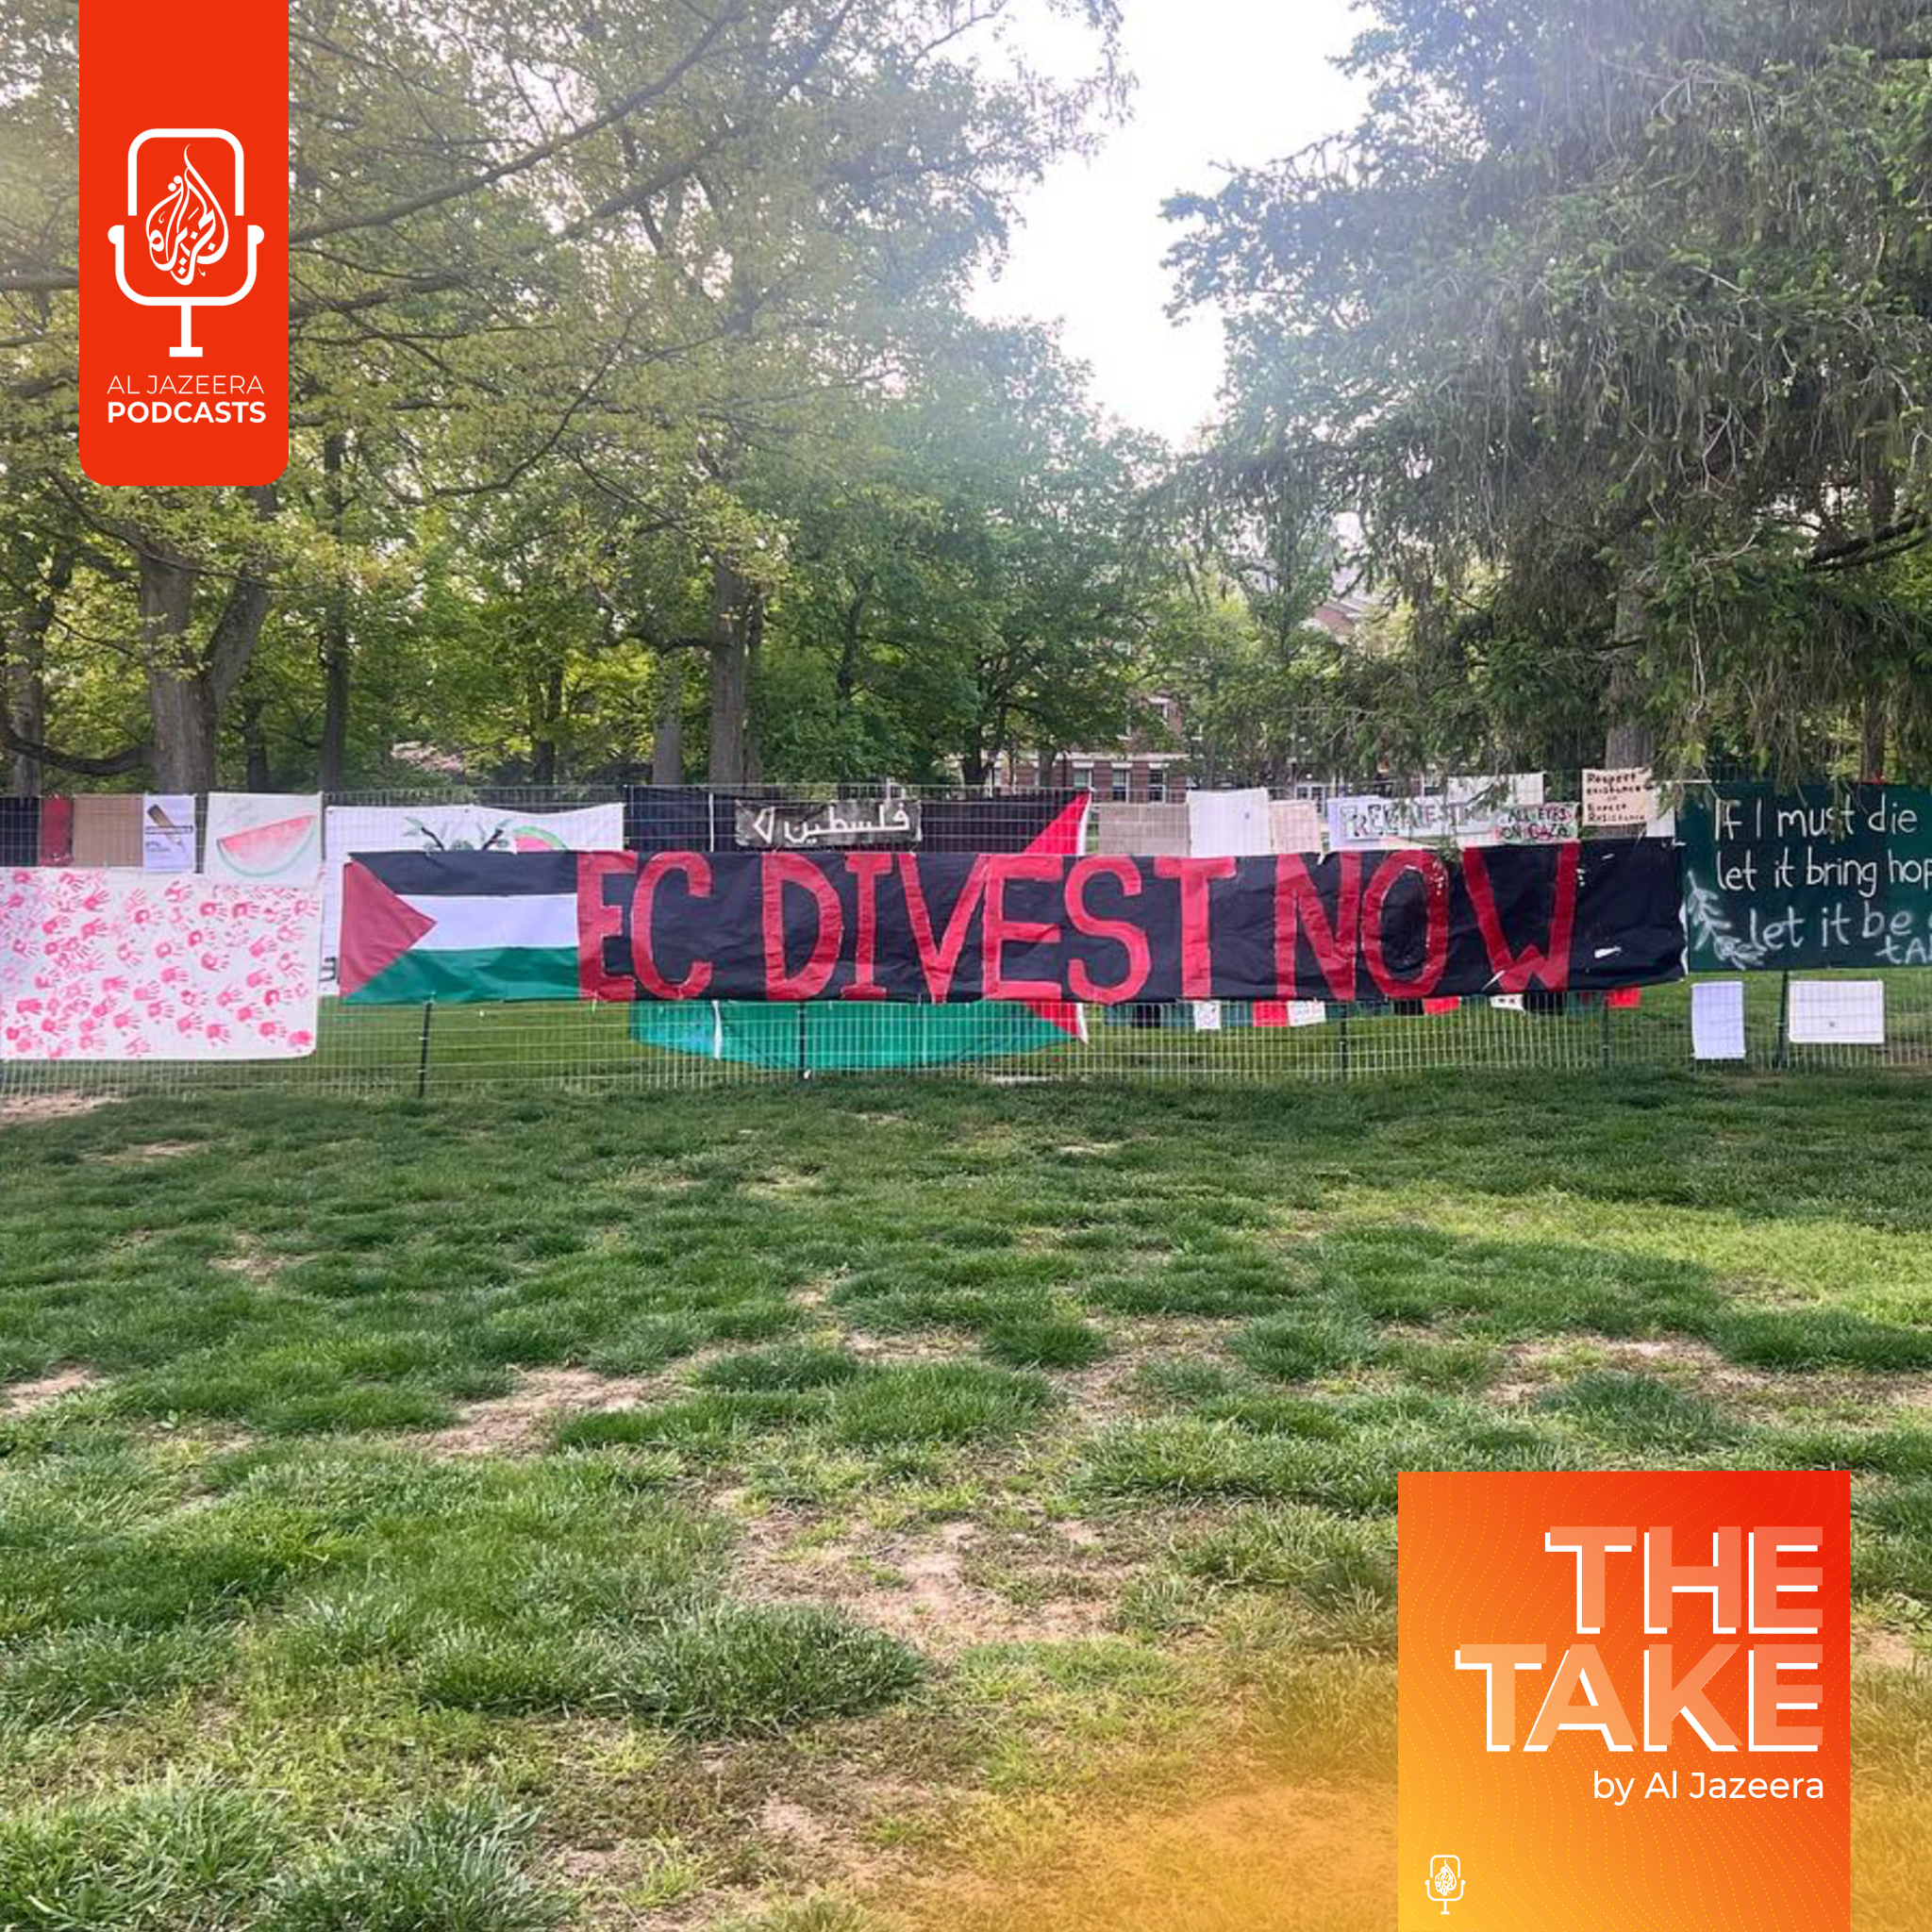 The quest to divest from Israel at Earlham College